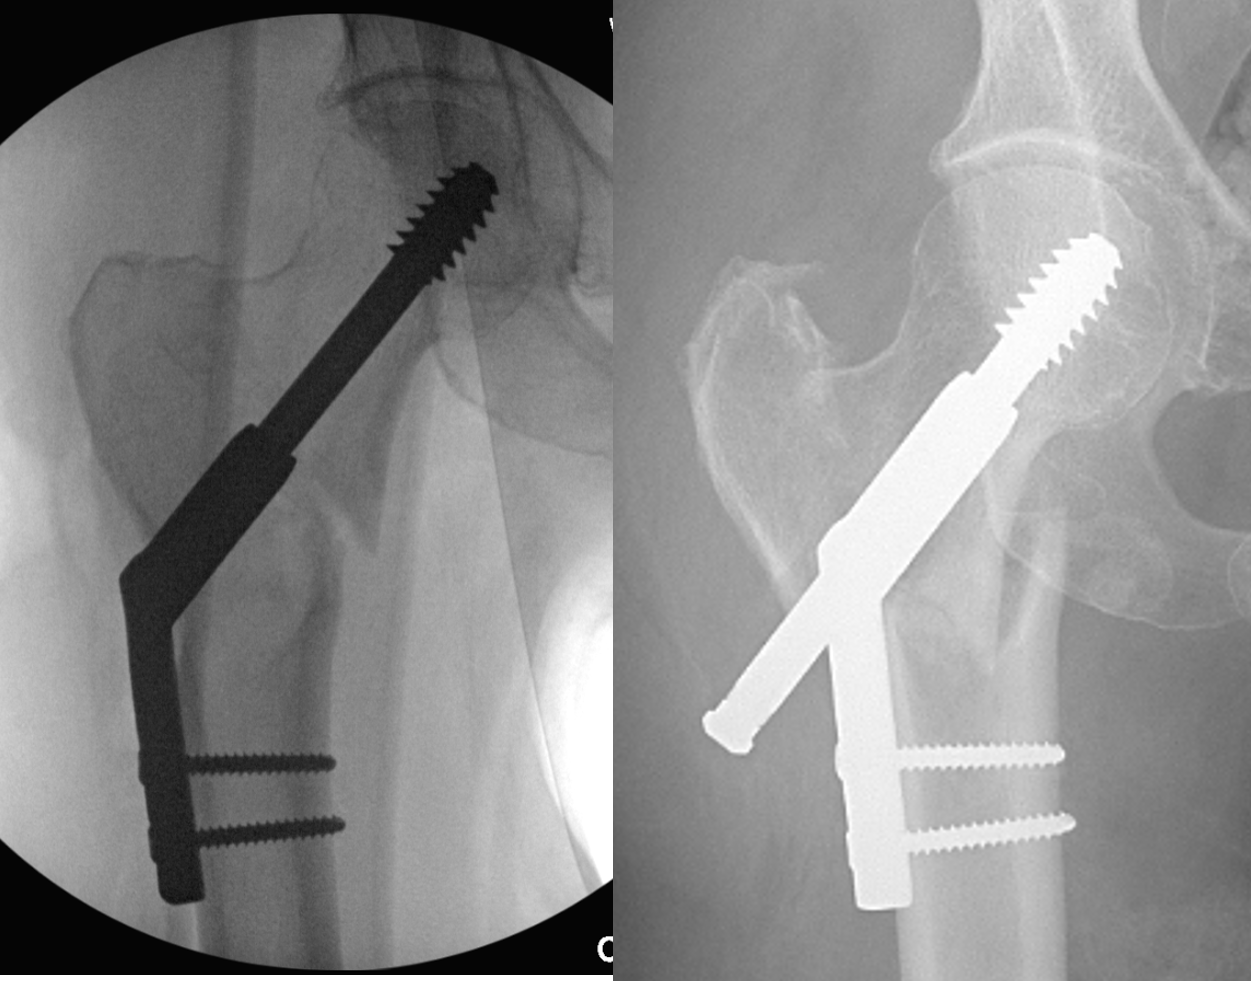 Intra-op and Post-op images of IT femur fracture treated with DHS